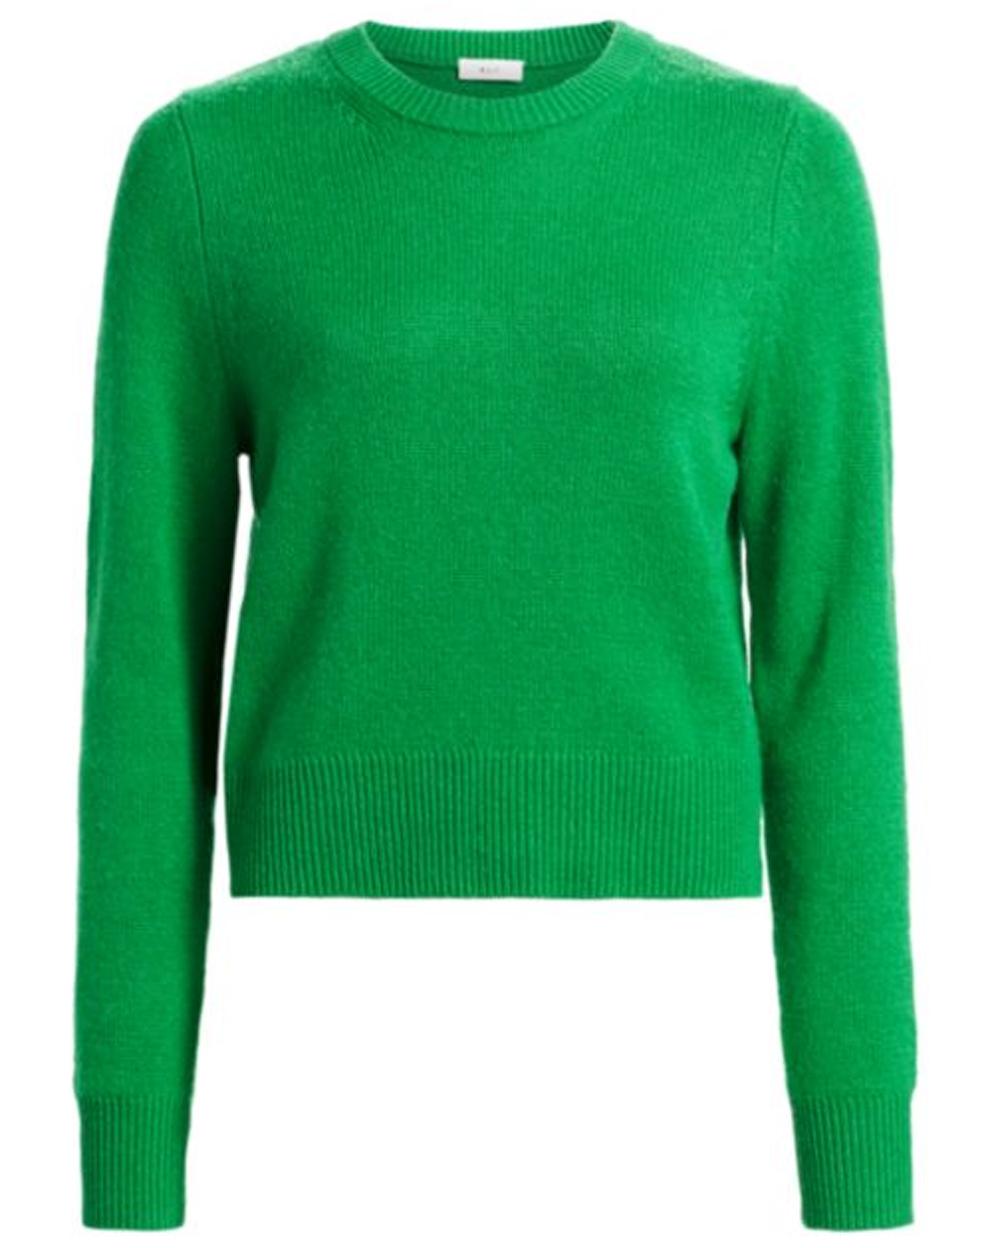 A.L.C. Synthetic Green Wooster Crewneck Long Sleeve Sweater - Lyst